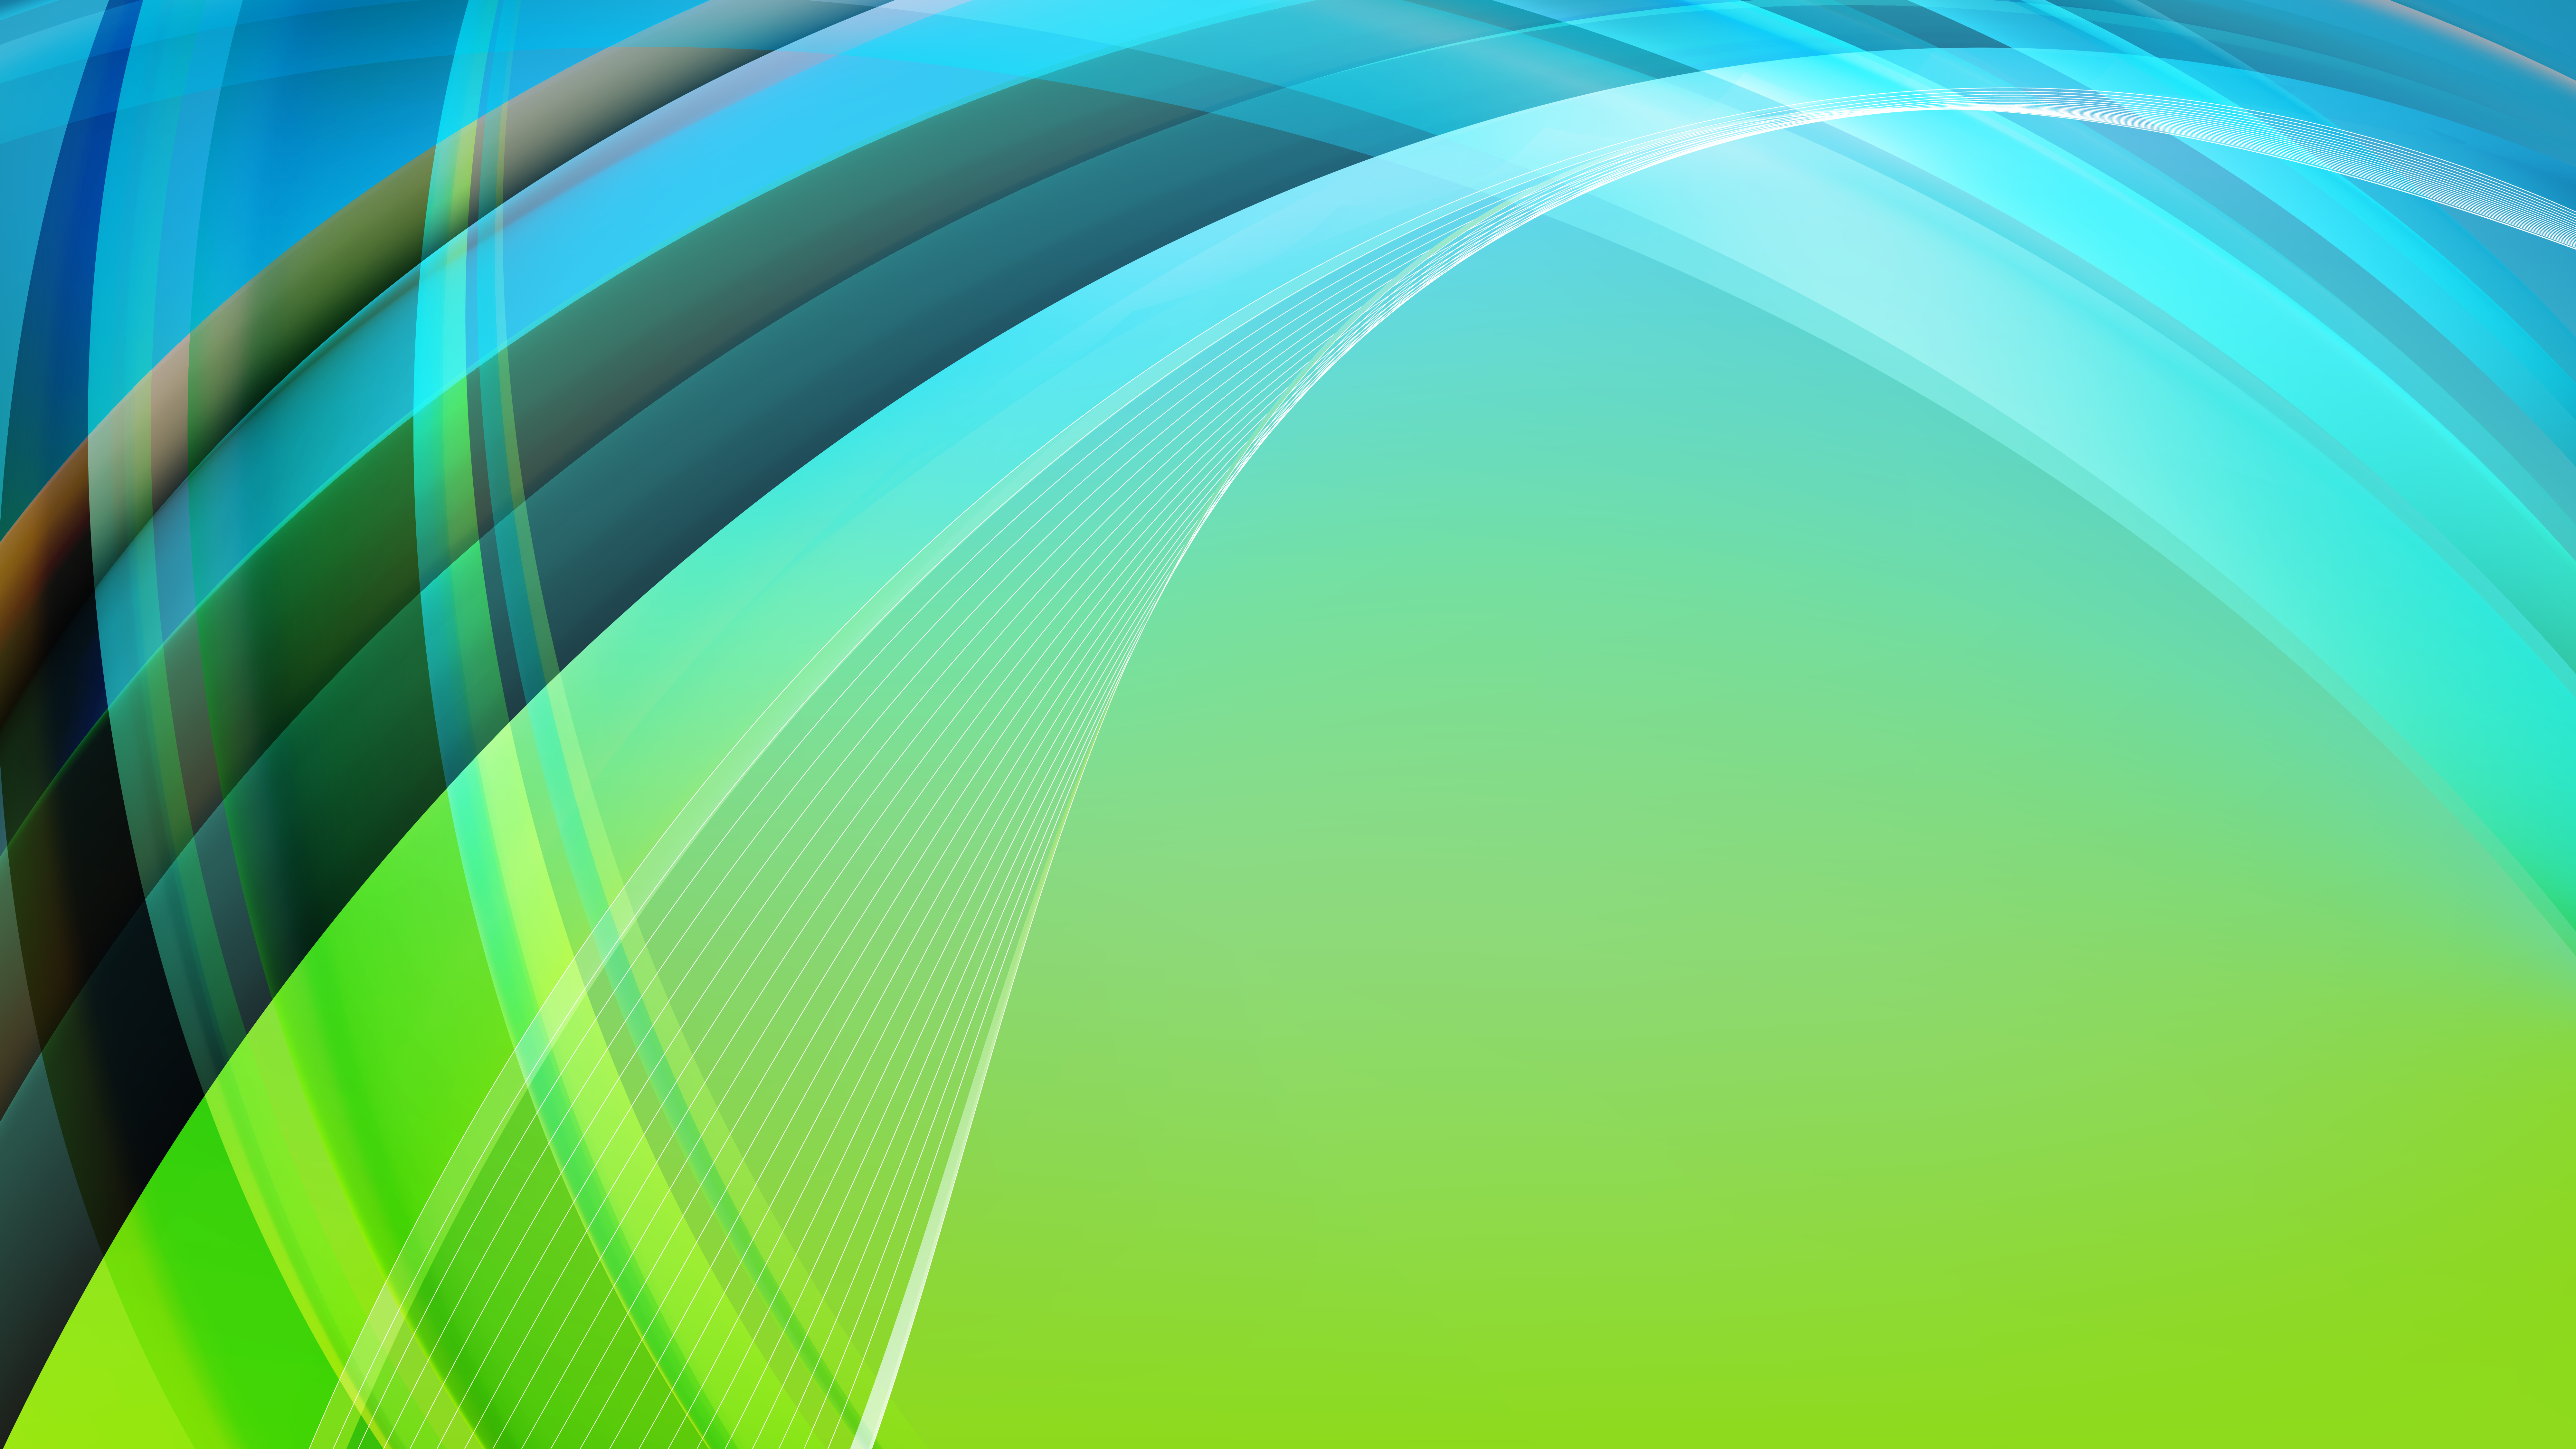 Free Abstract Black Blue and Green Curve Background Image